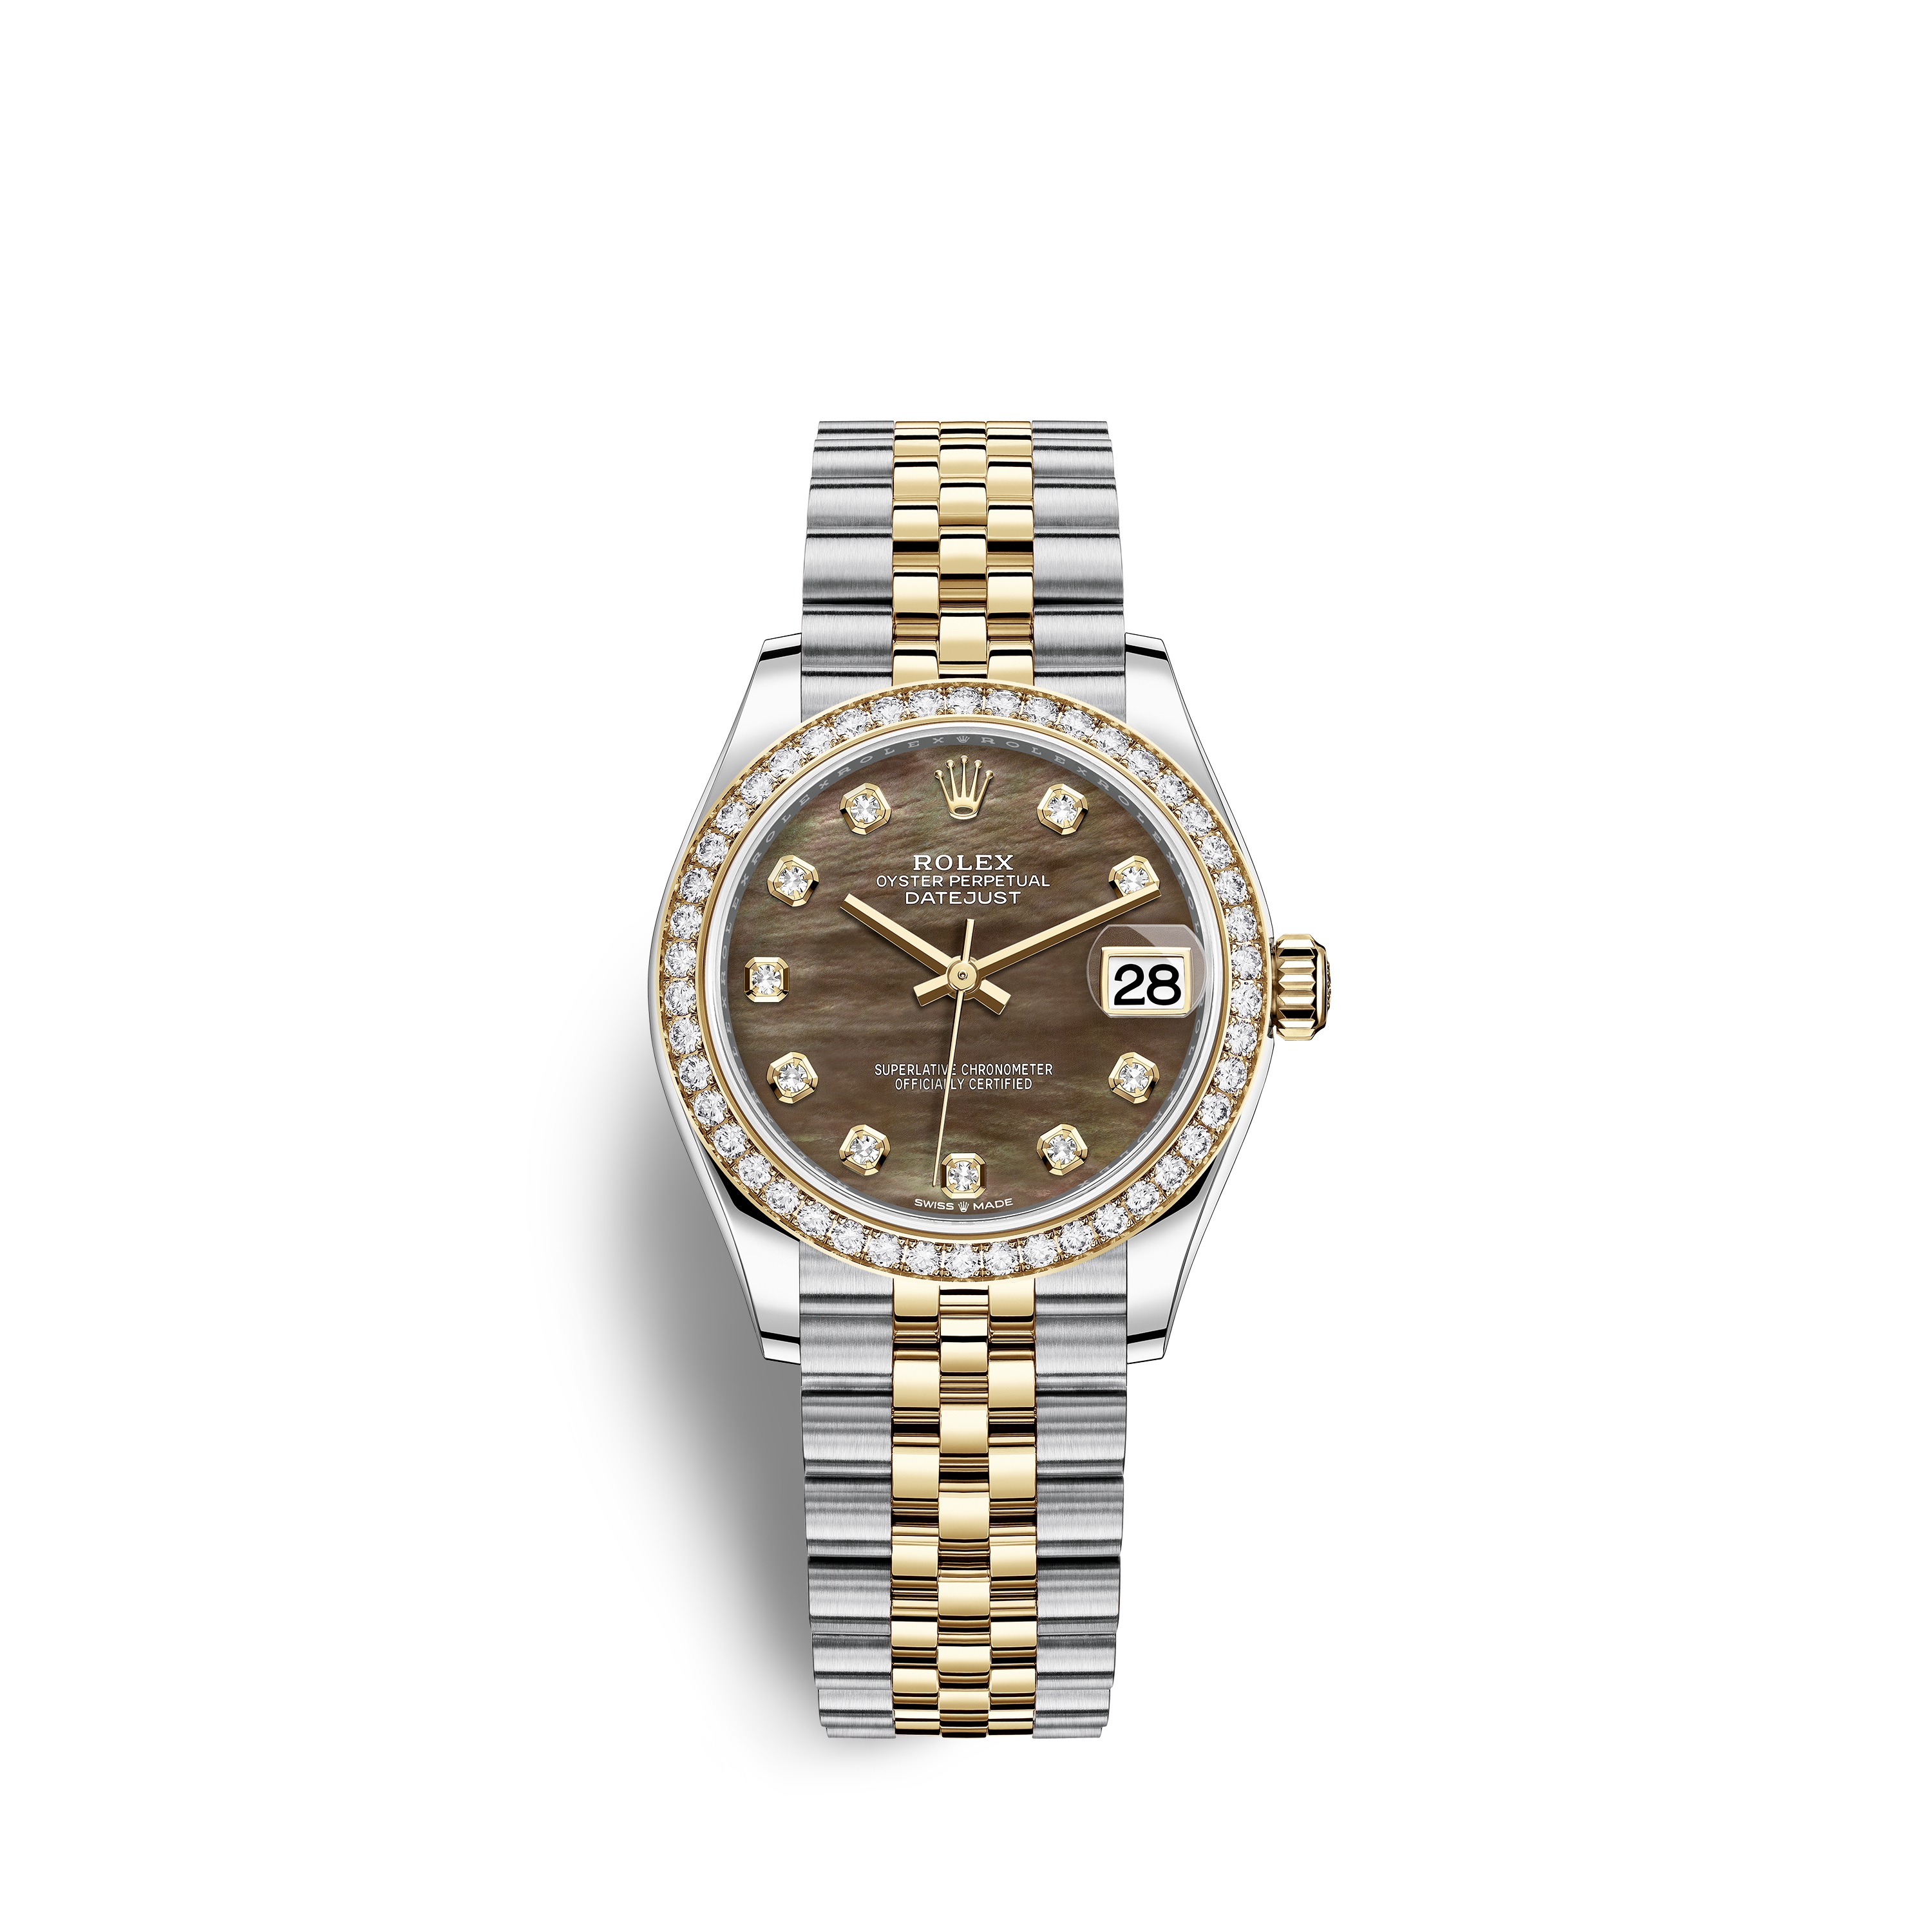 Datejust 31 278383RBR Gold & Stainless Steel Watch (Black Mother-of-Pearl Set with Diamonds)